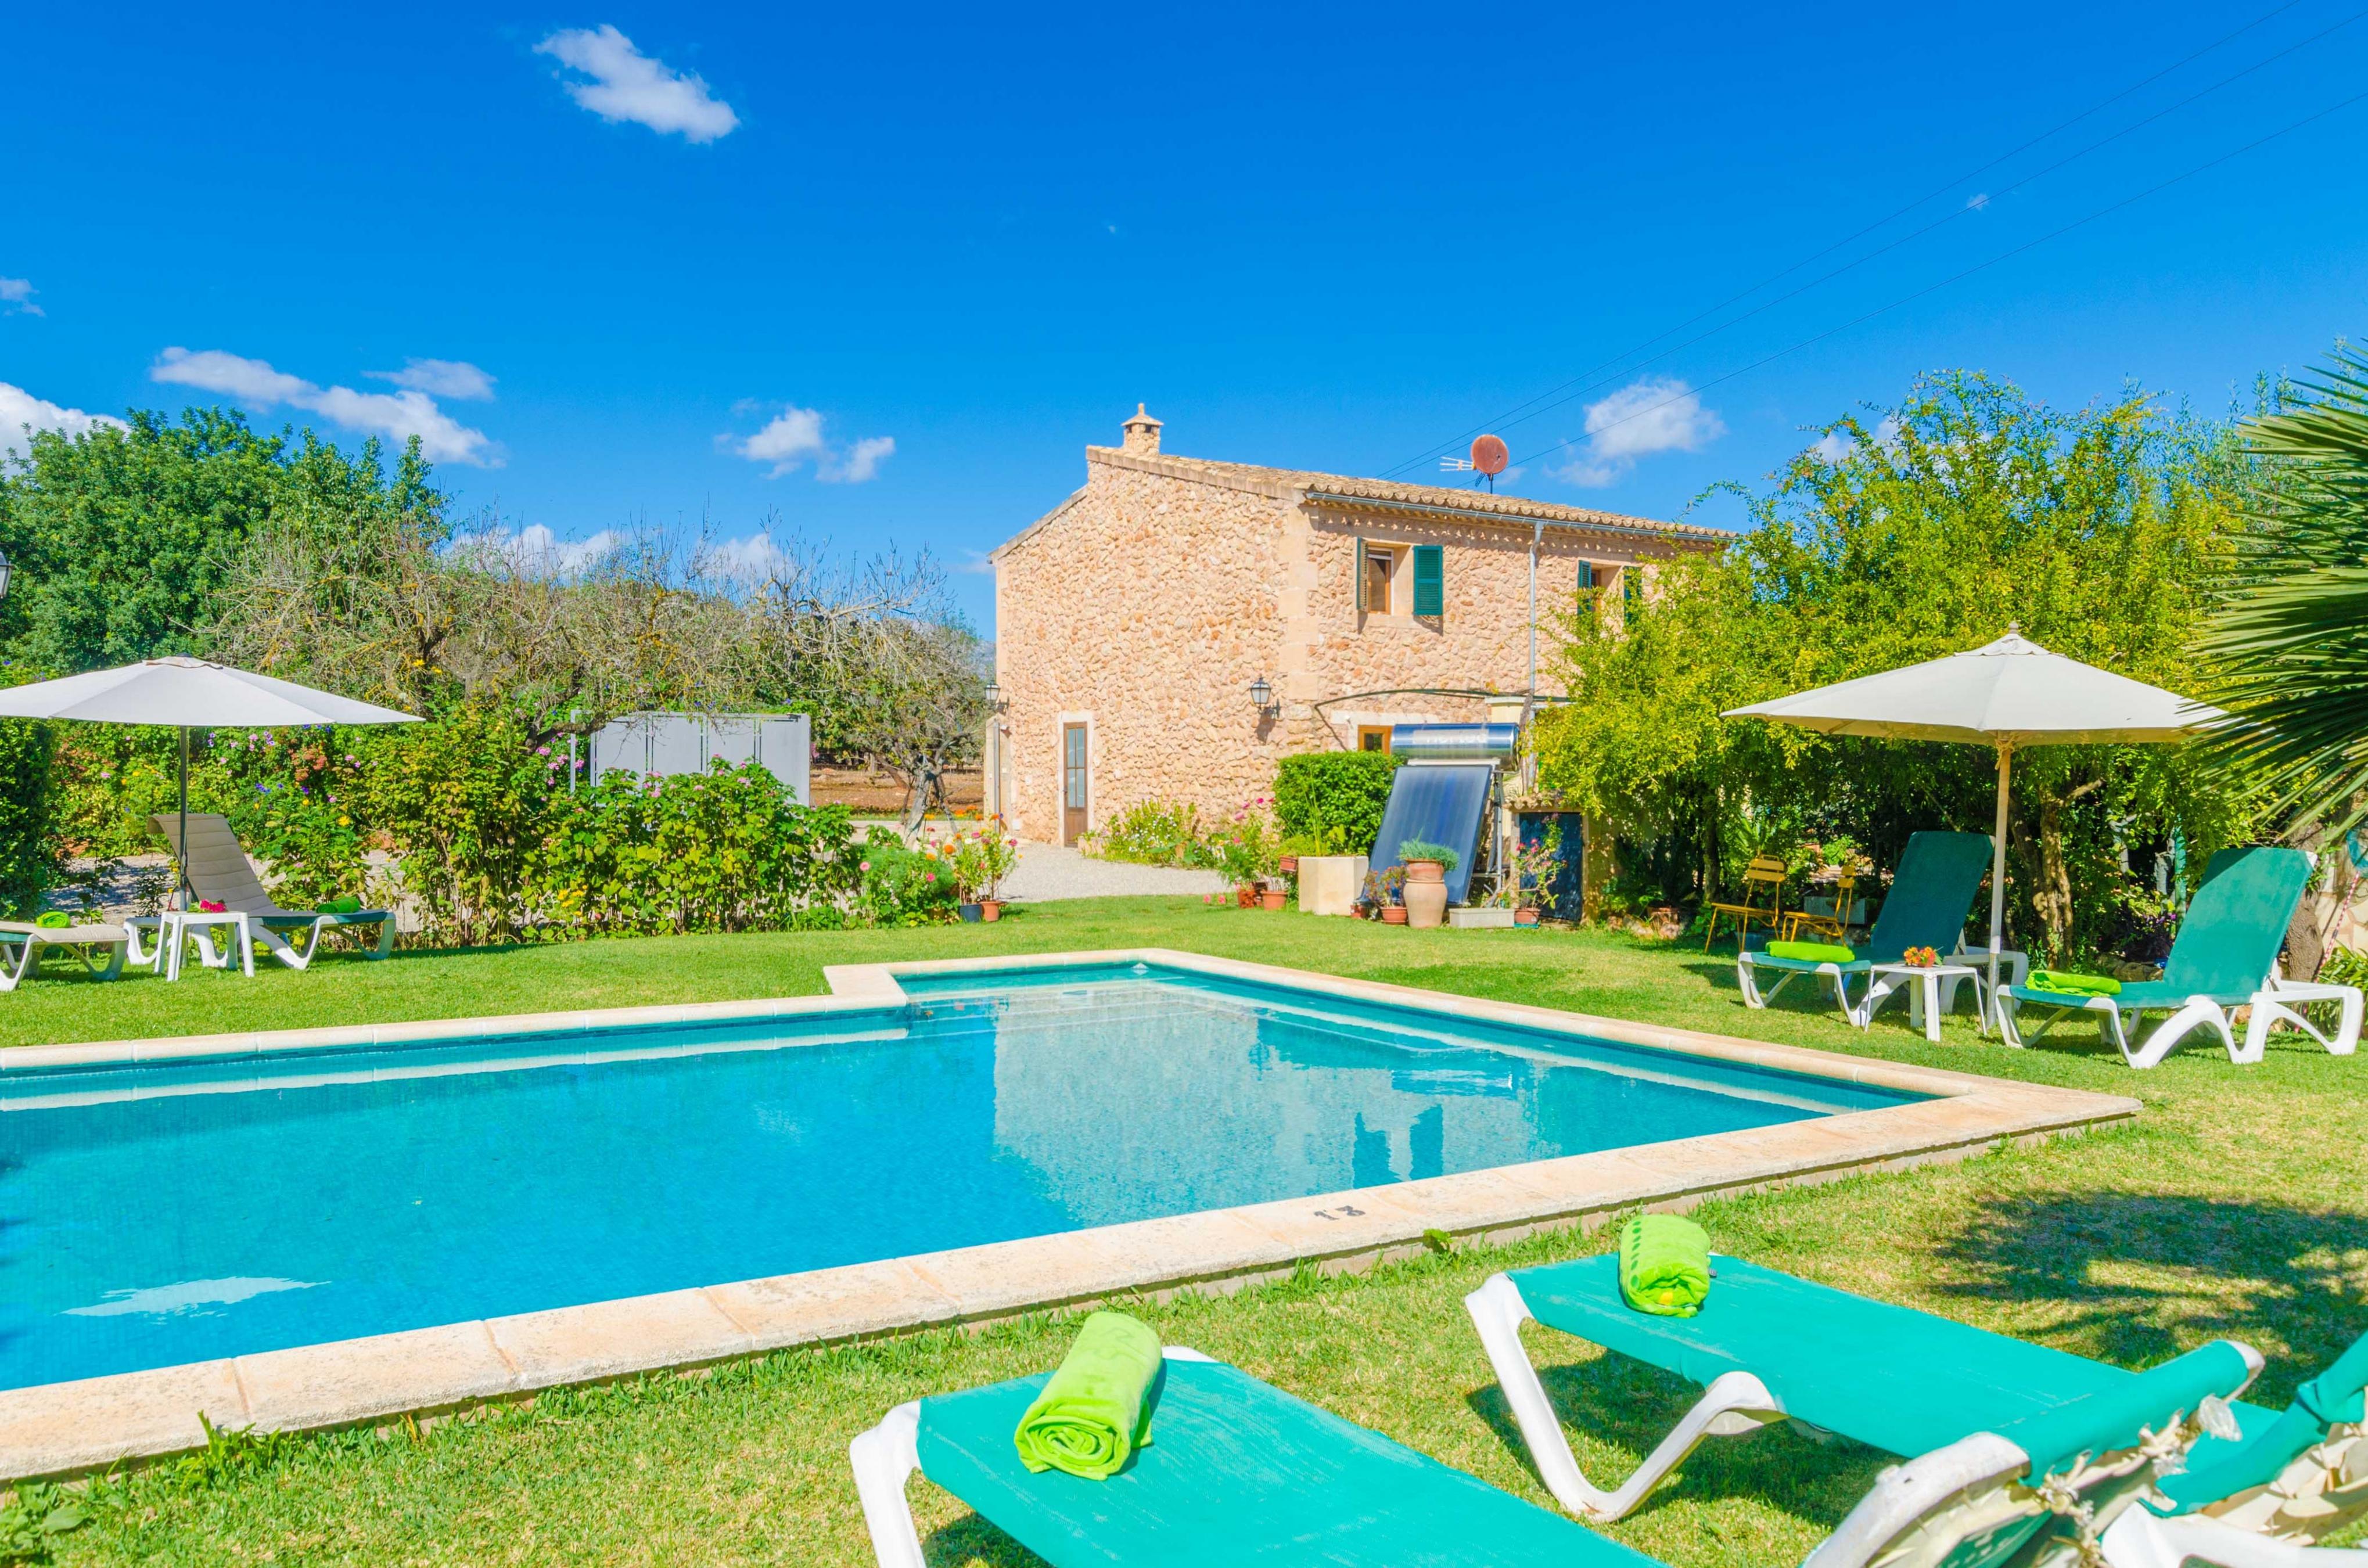 Property Image 1 - SA MATA - Spectacular Majorcan finca with private pool enclosed by the trees and greenery around.